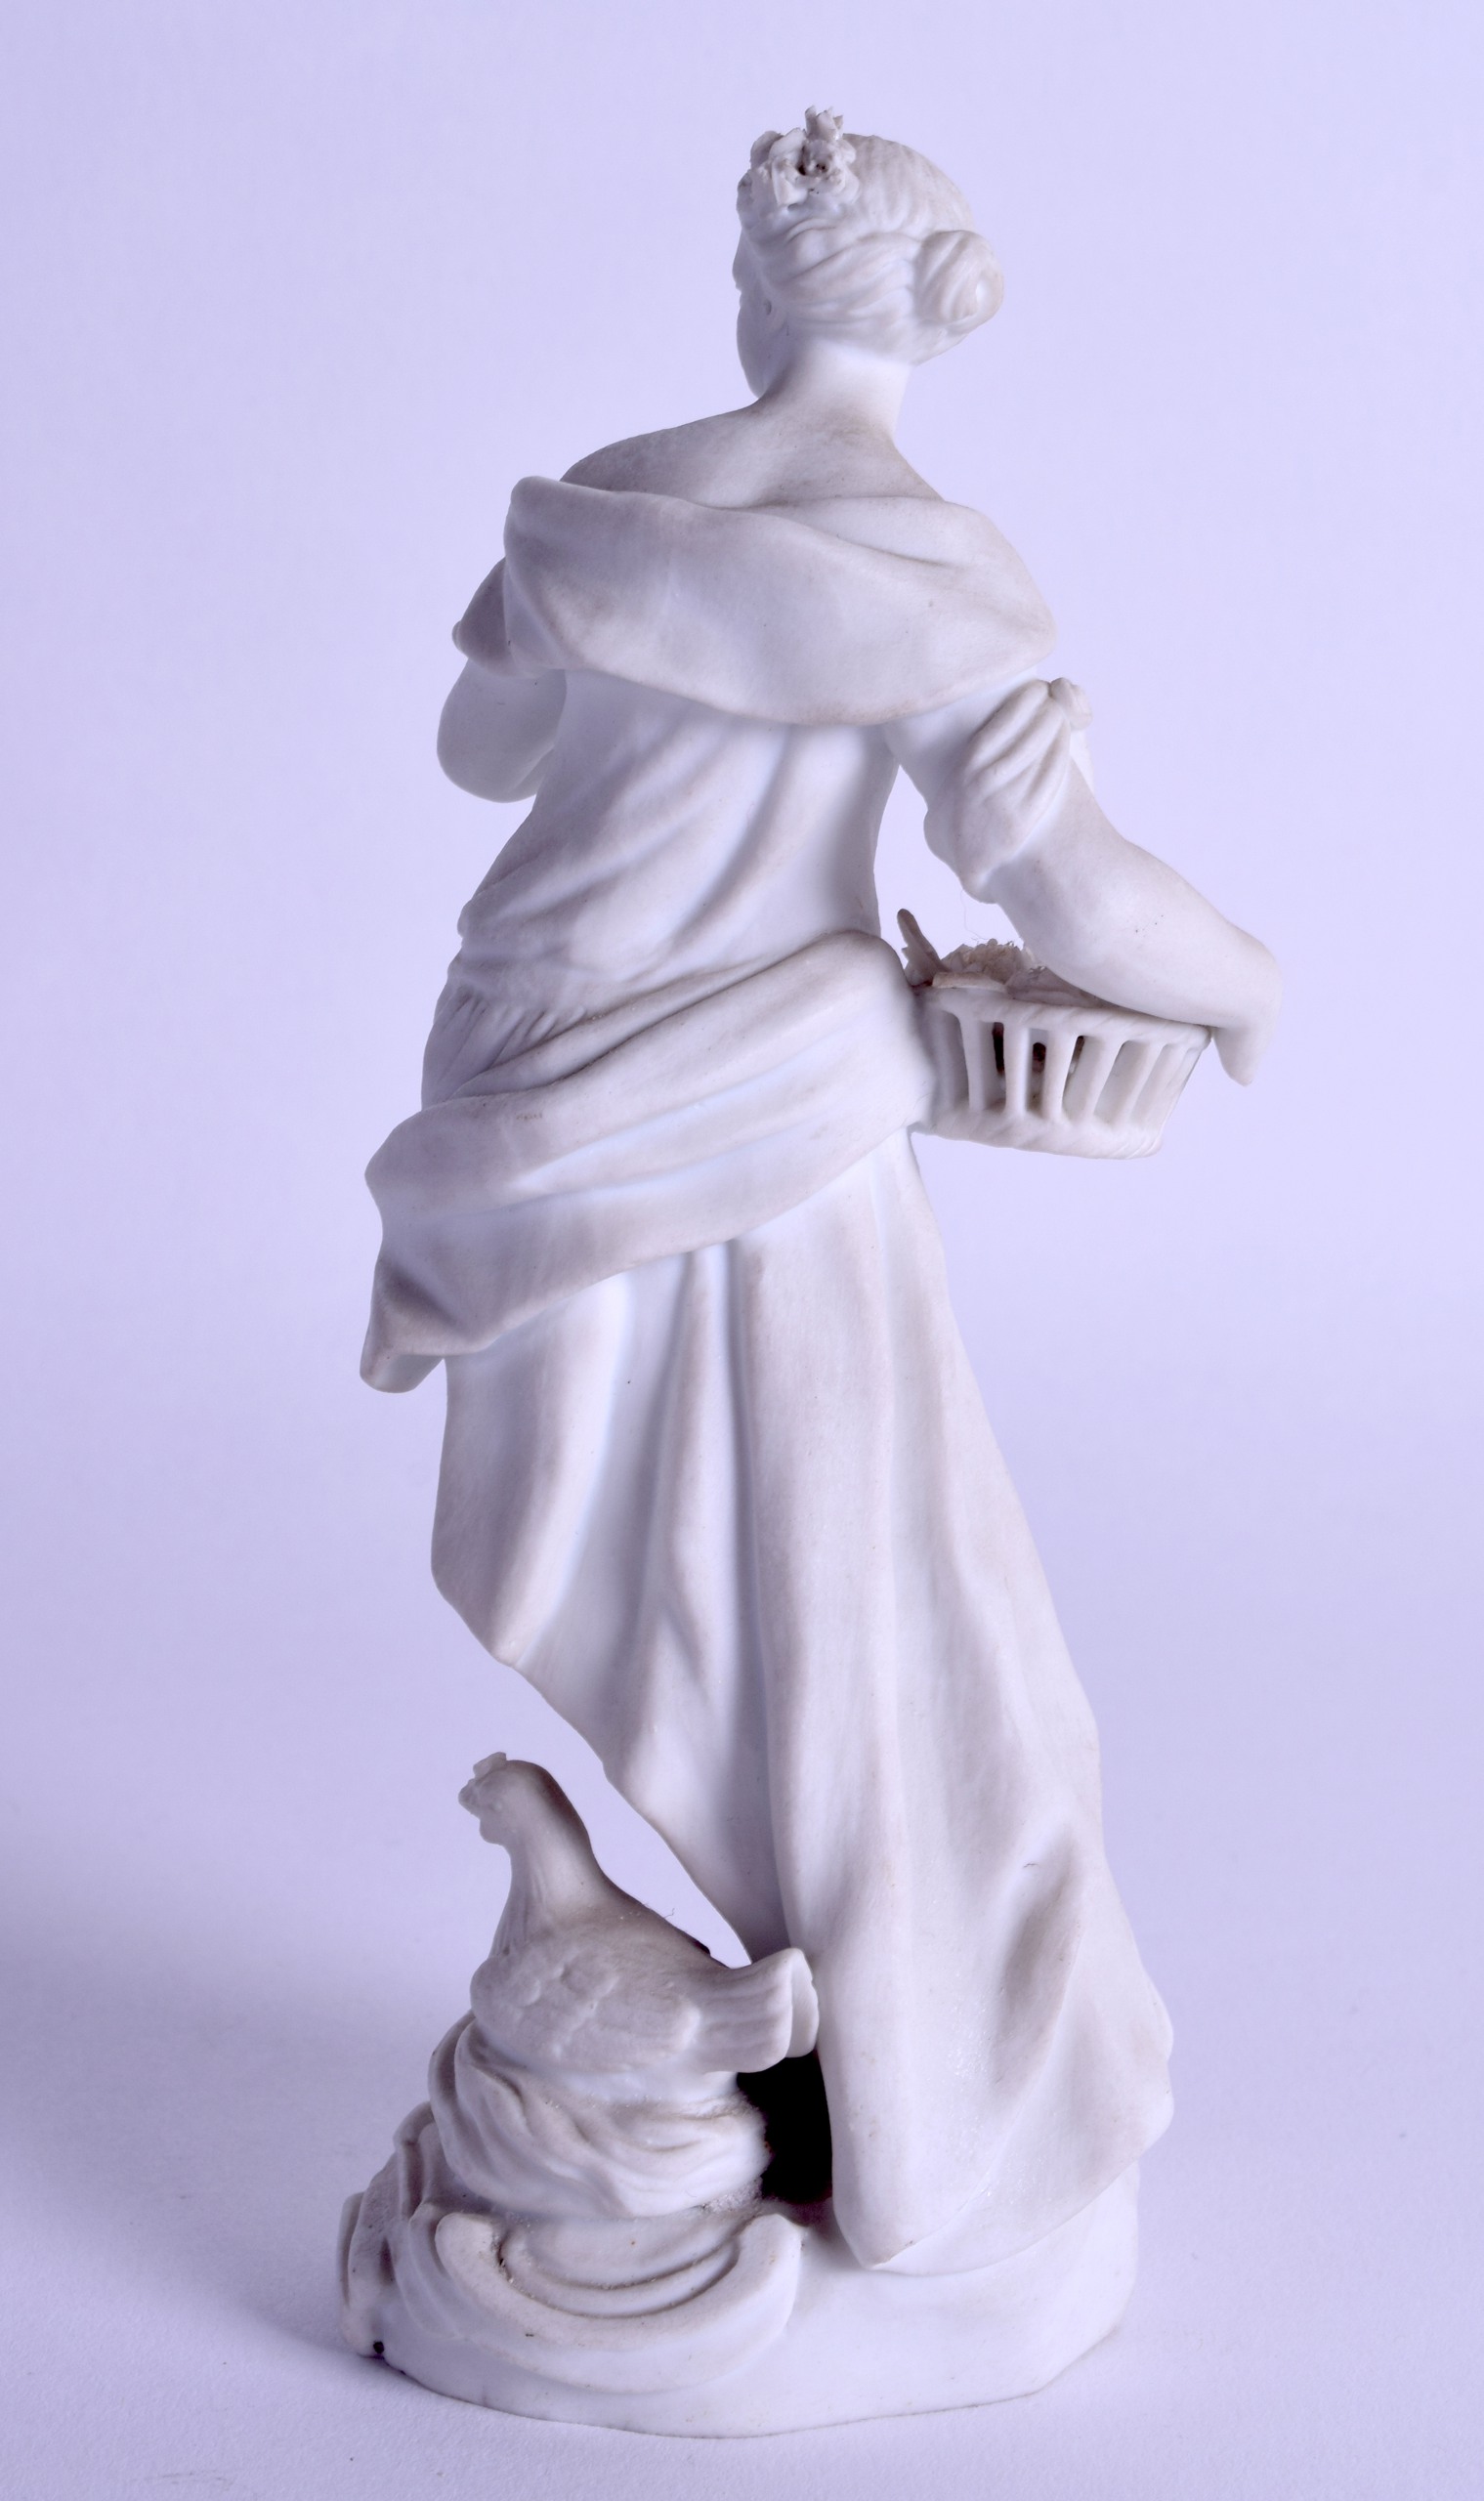 18th c. Meissen biscuit figure of woman in a flowing robe holding flowers in a basket standing on - Image 2 of 3